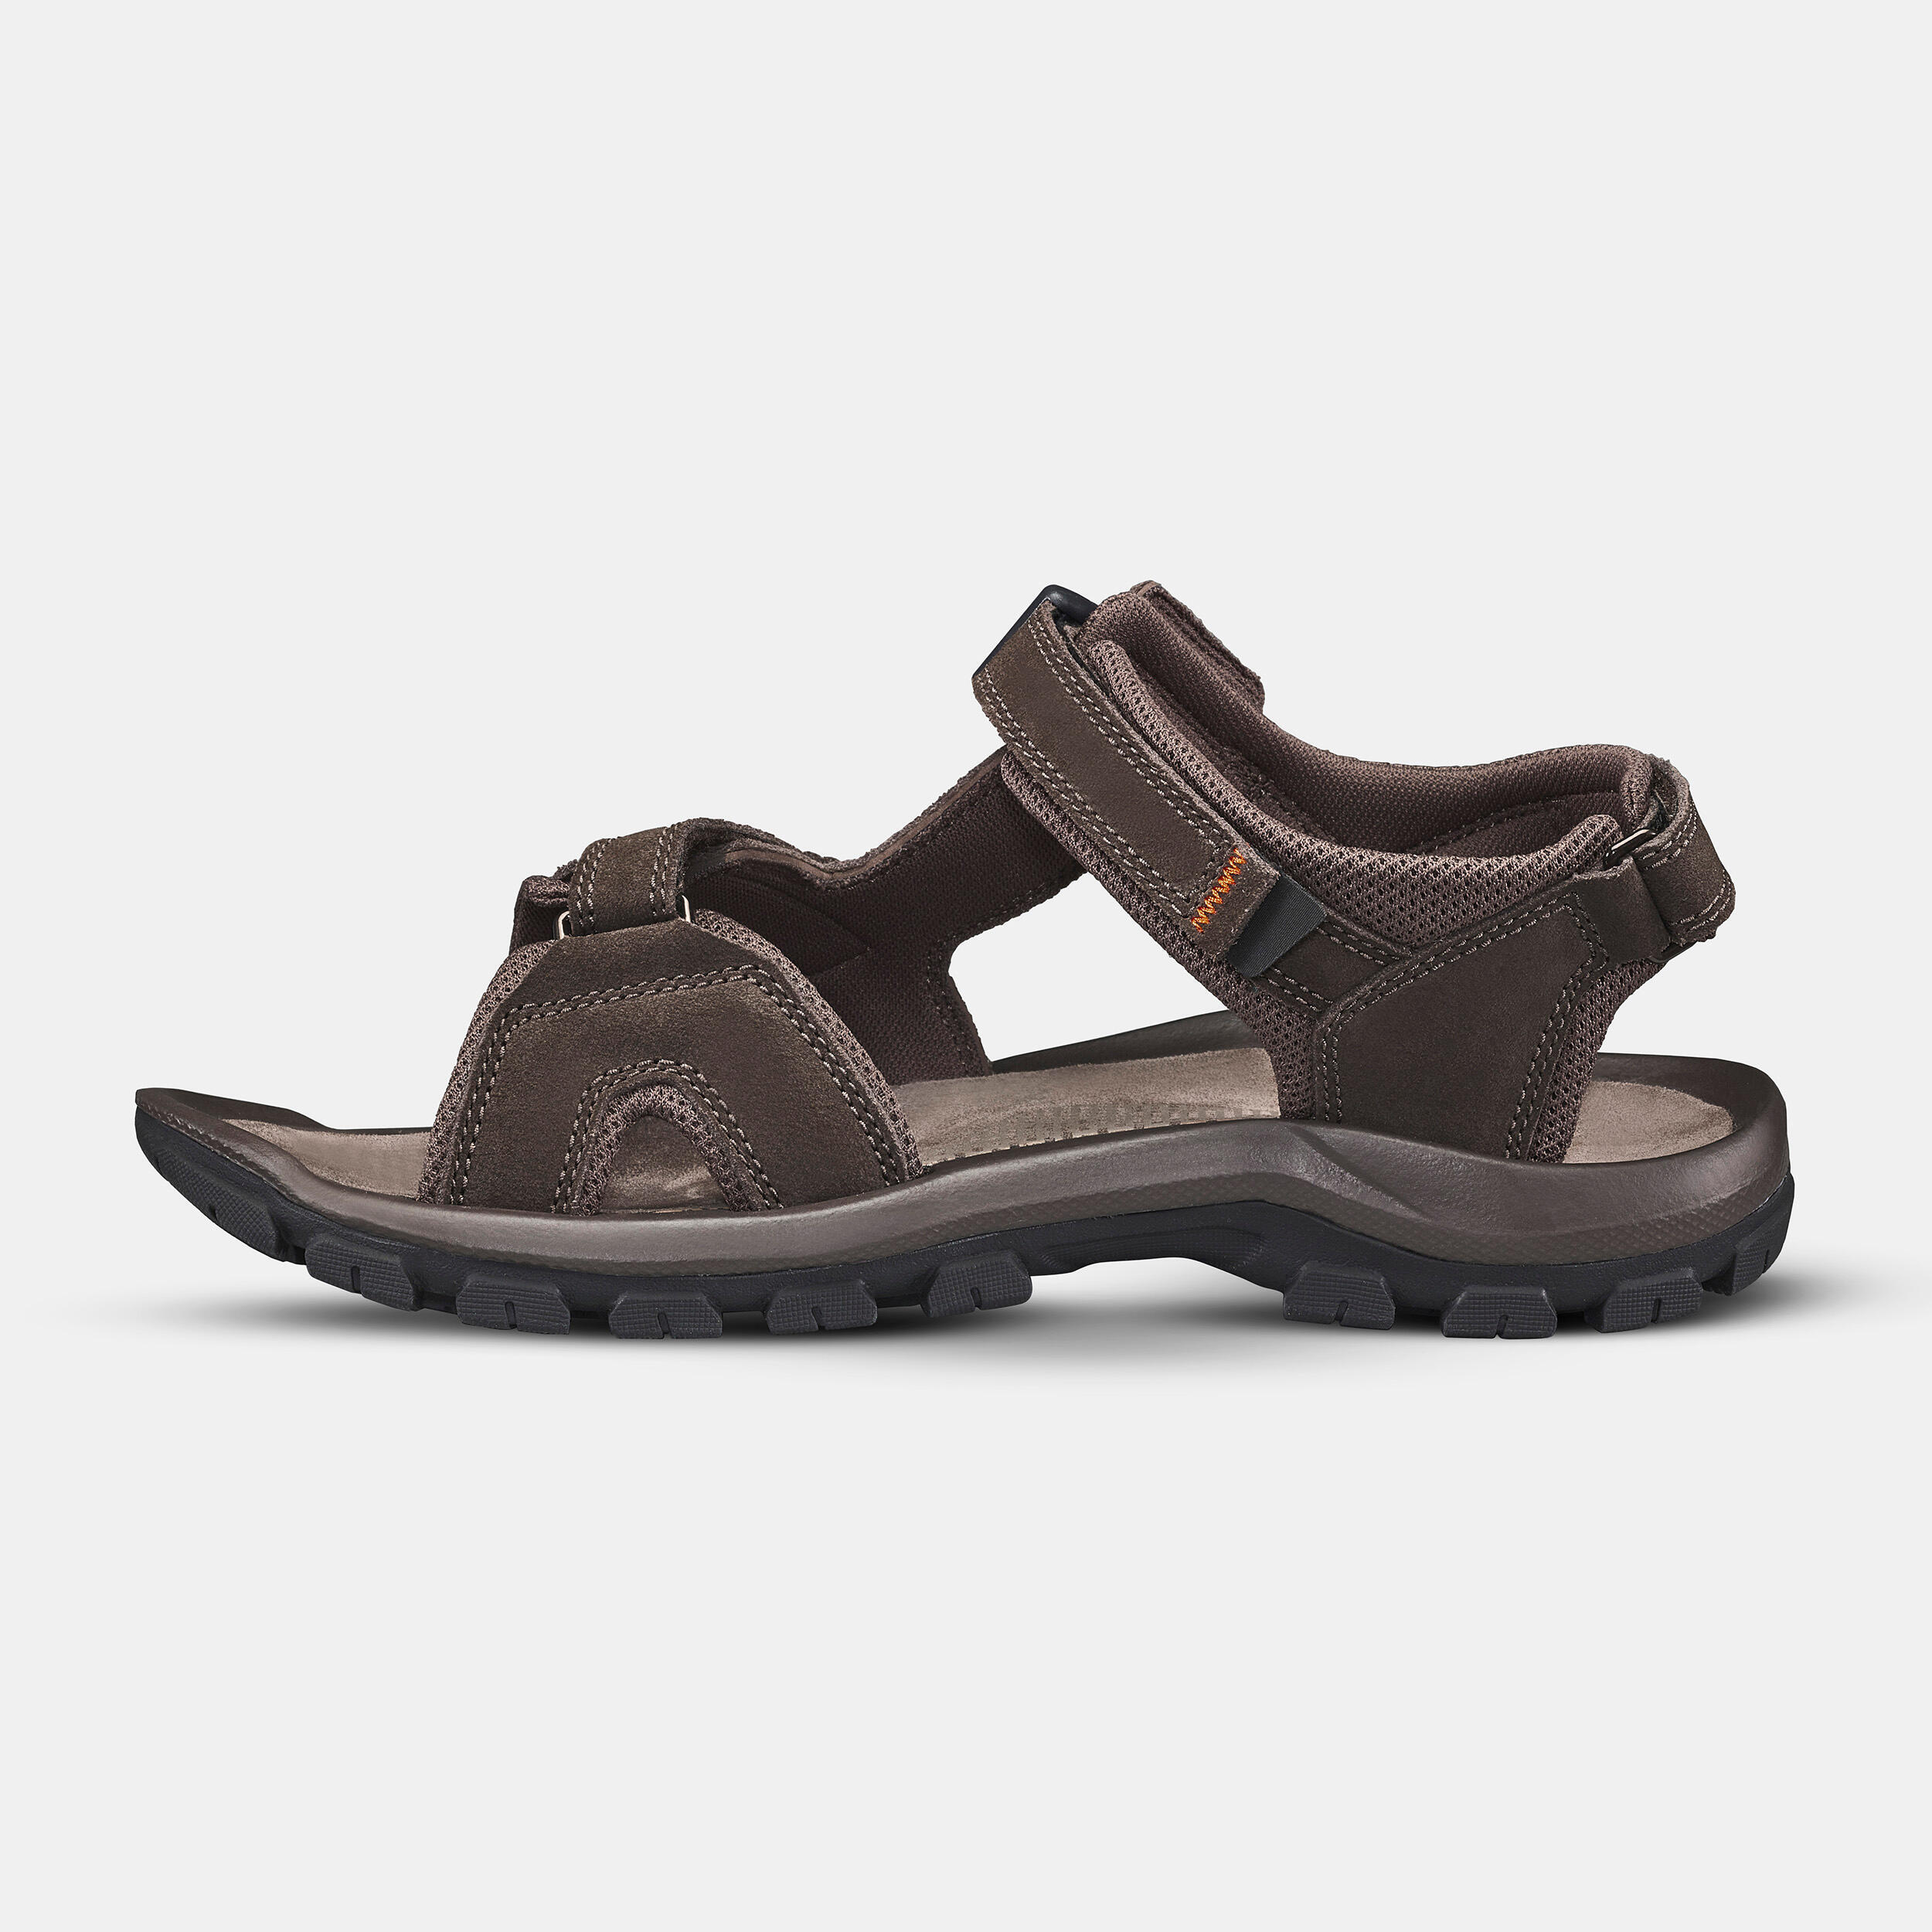 Men's Leather Hiking Sandals NH500 2/7